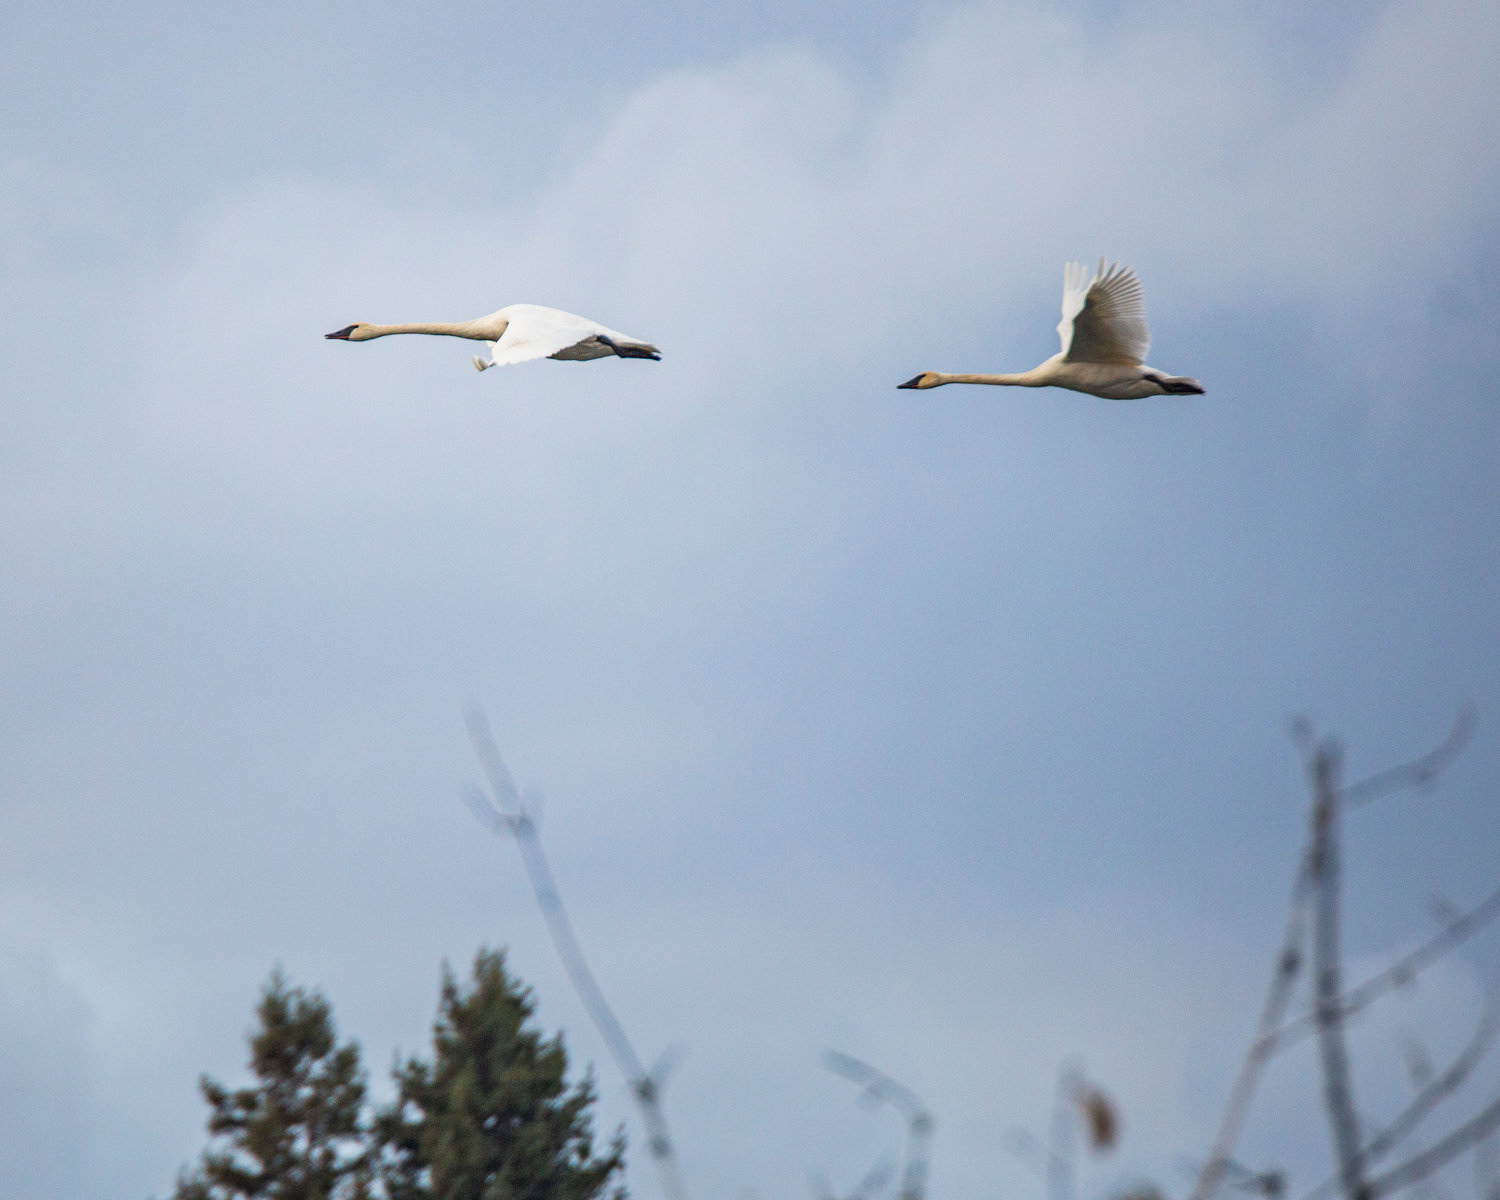 Trumpeter swans take flight over the Willapa Hills Trail in Chehalis on Saturday afternoon.